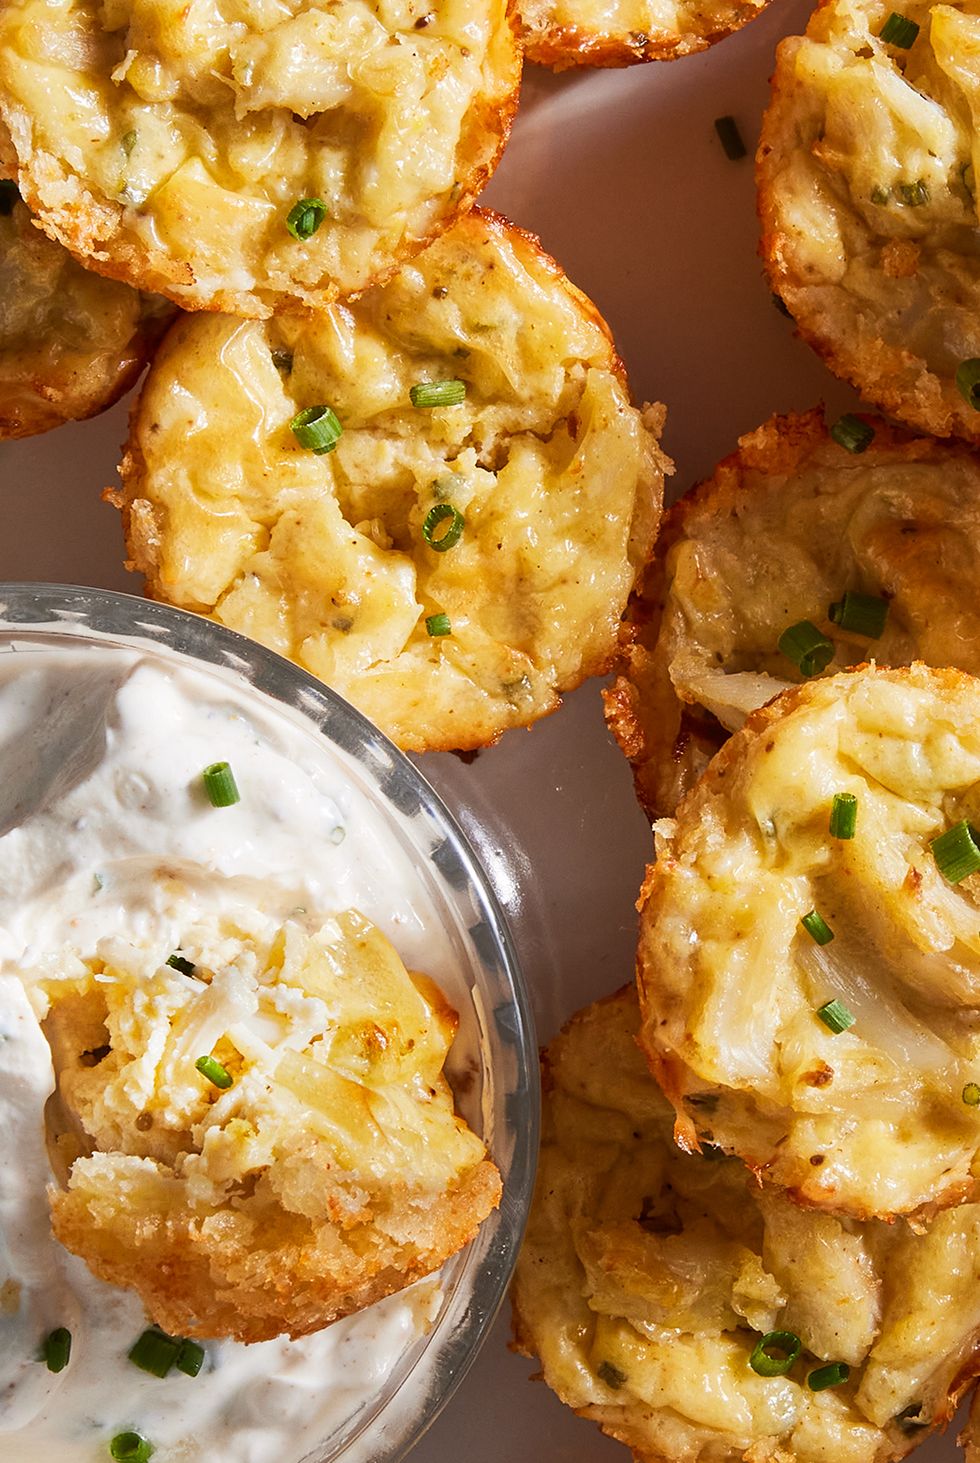 crab cake bites dipped in a sour cream and chive dipping sauce